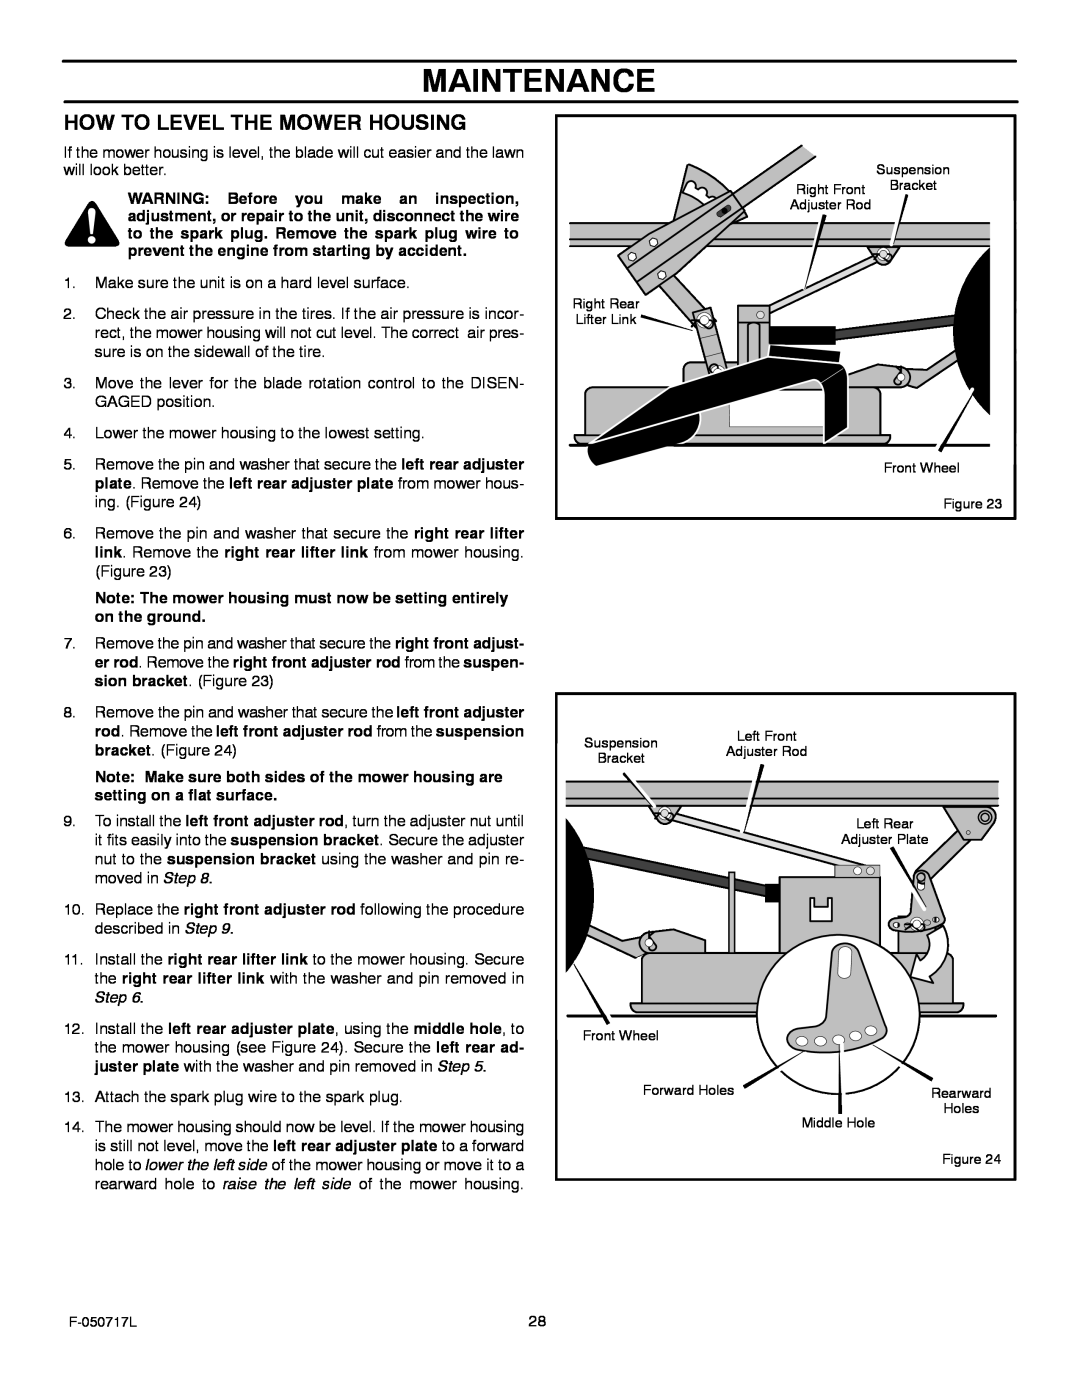 Murray 387002x92D manual Maintenance, How To Level The Mower Housing 